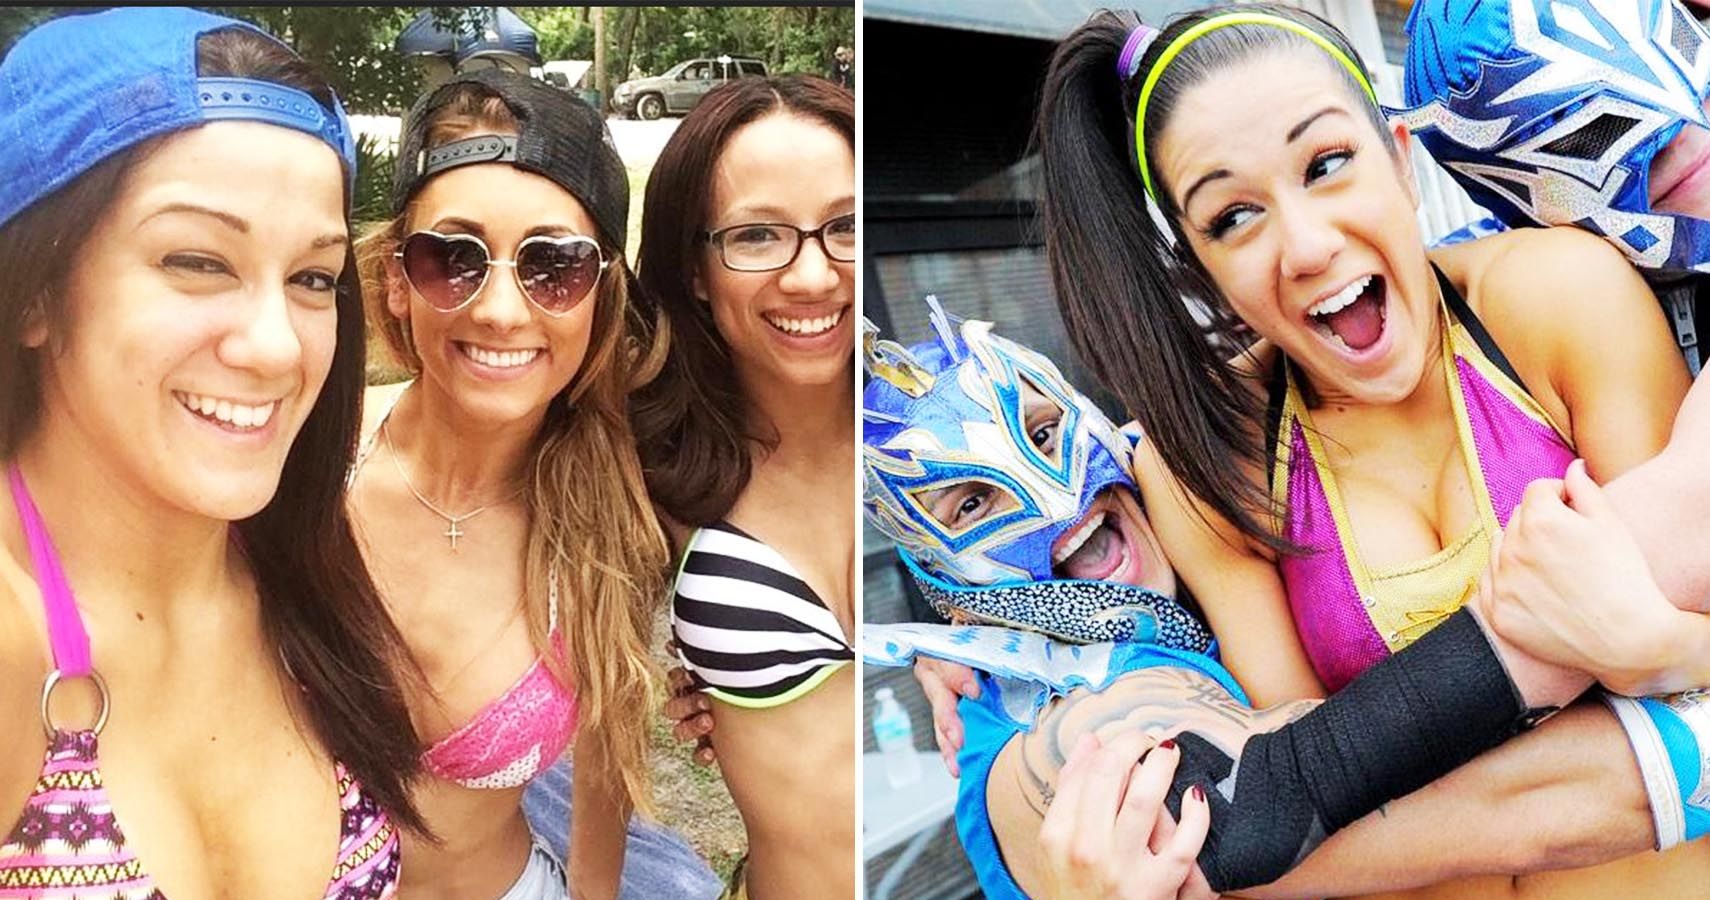 donna latimer recommends Wwe Diva Bayley Nude